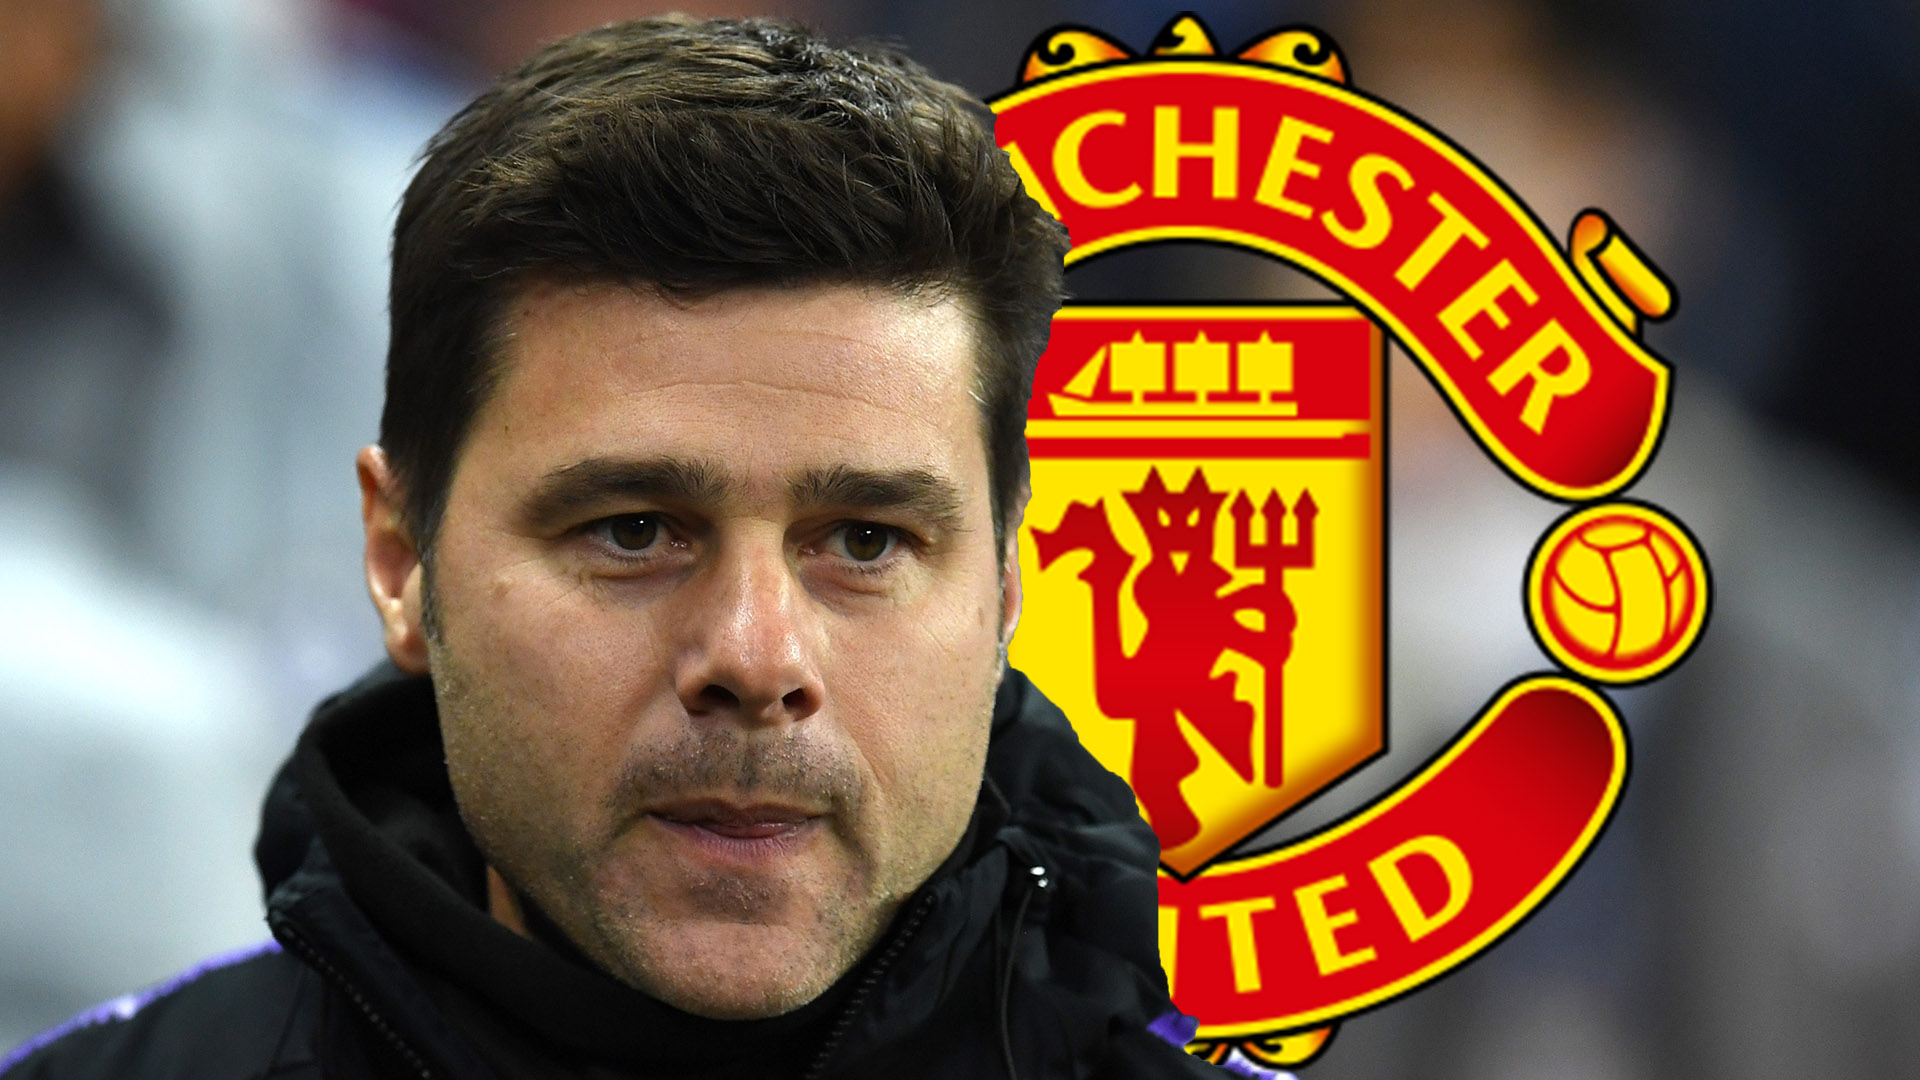 Pochettino would take Man Utd to another dimension' – Ex-Spurs boss is  'world-class', says O'Hara | Goal.com